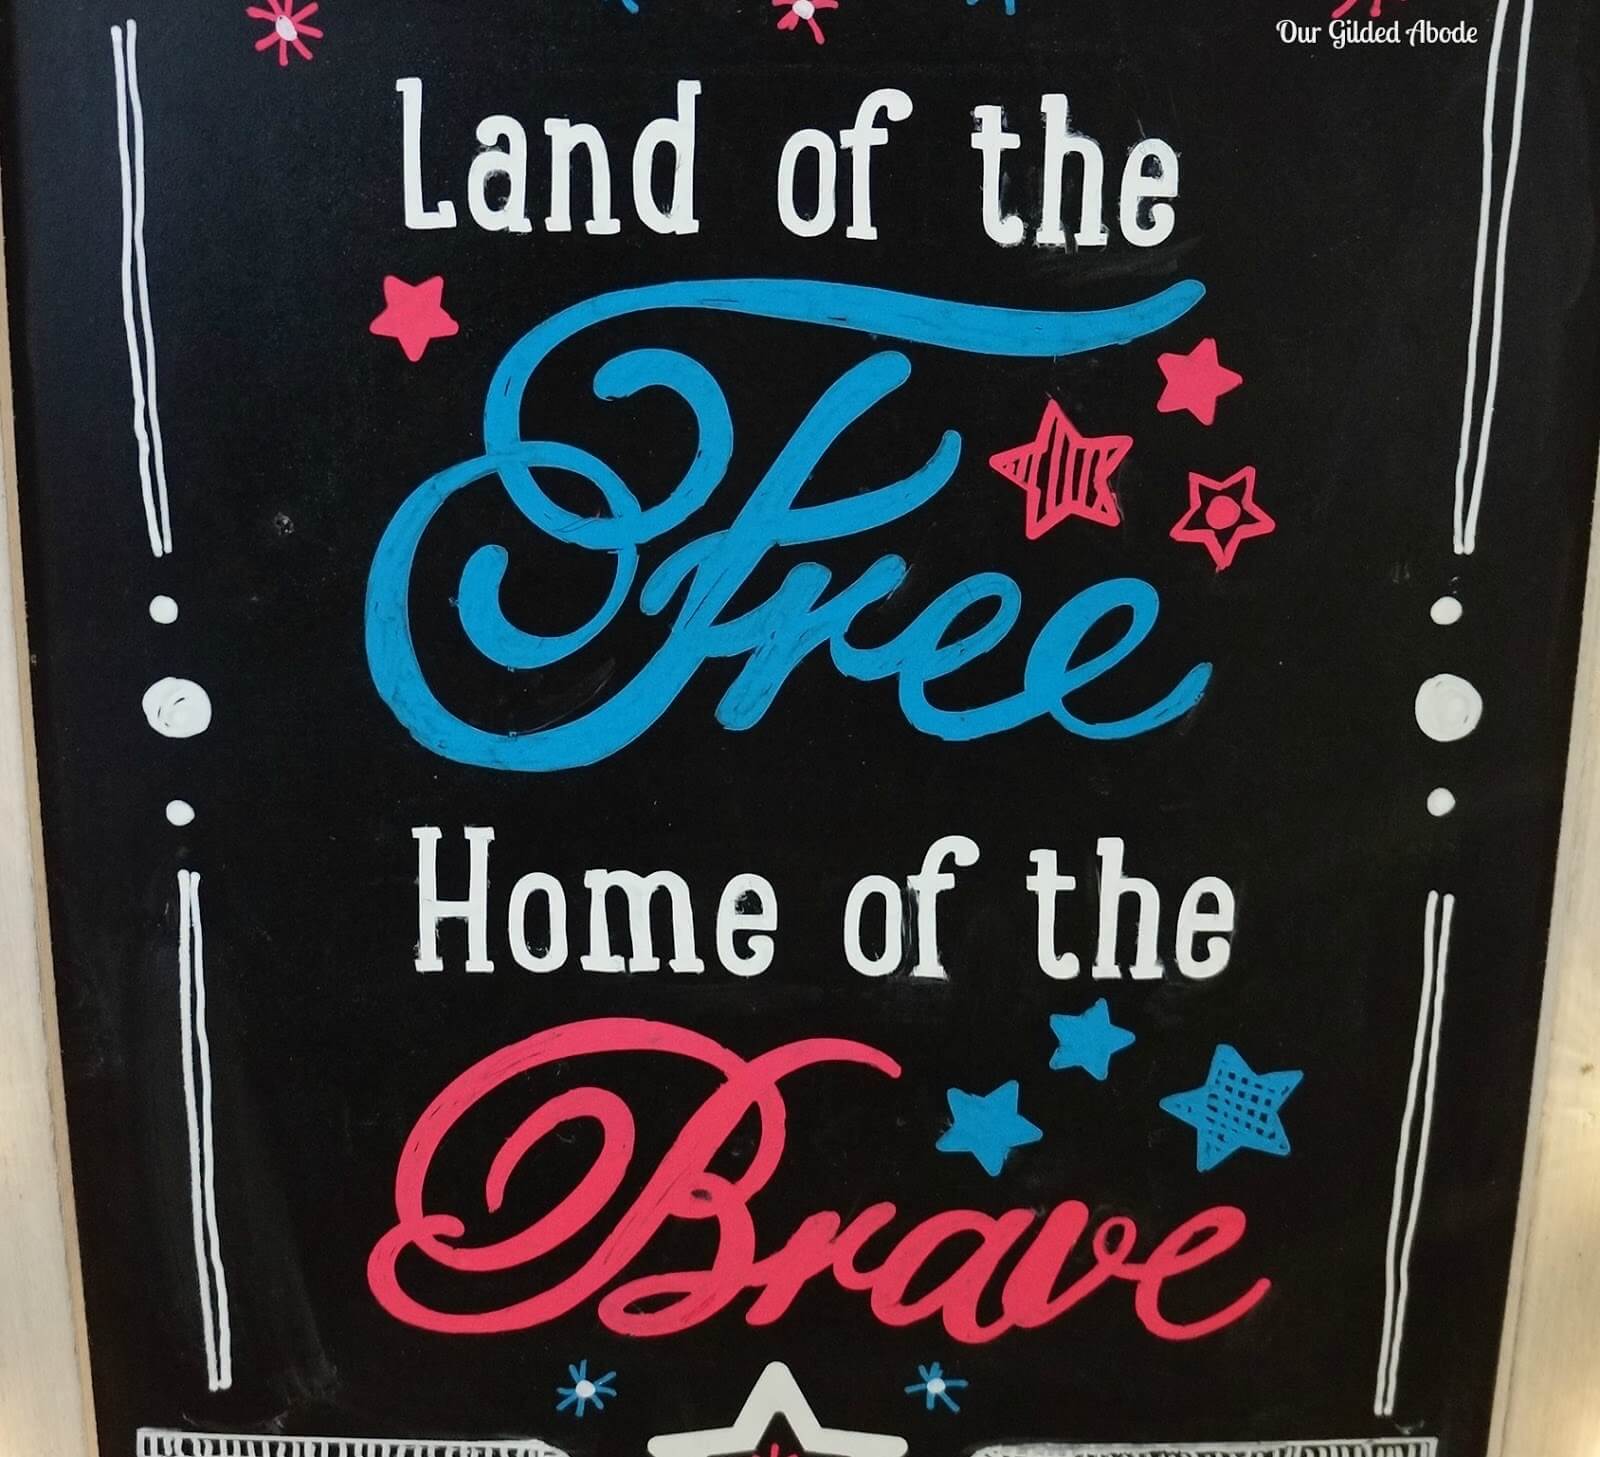 4th of July crafts like this chalkboard idea